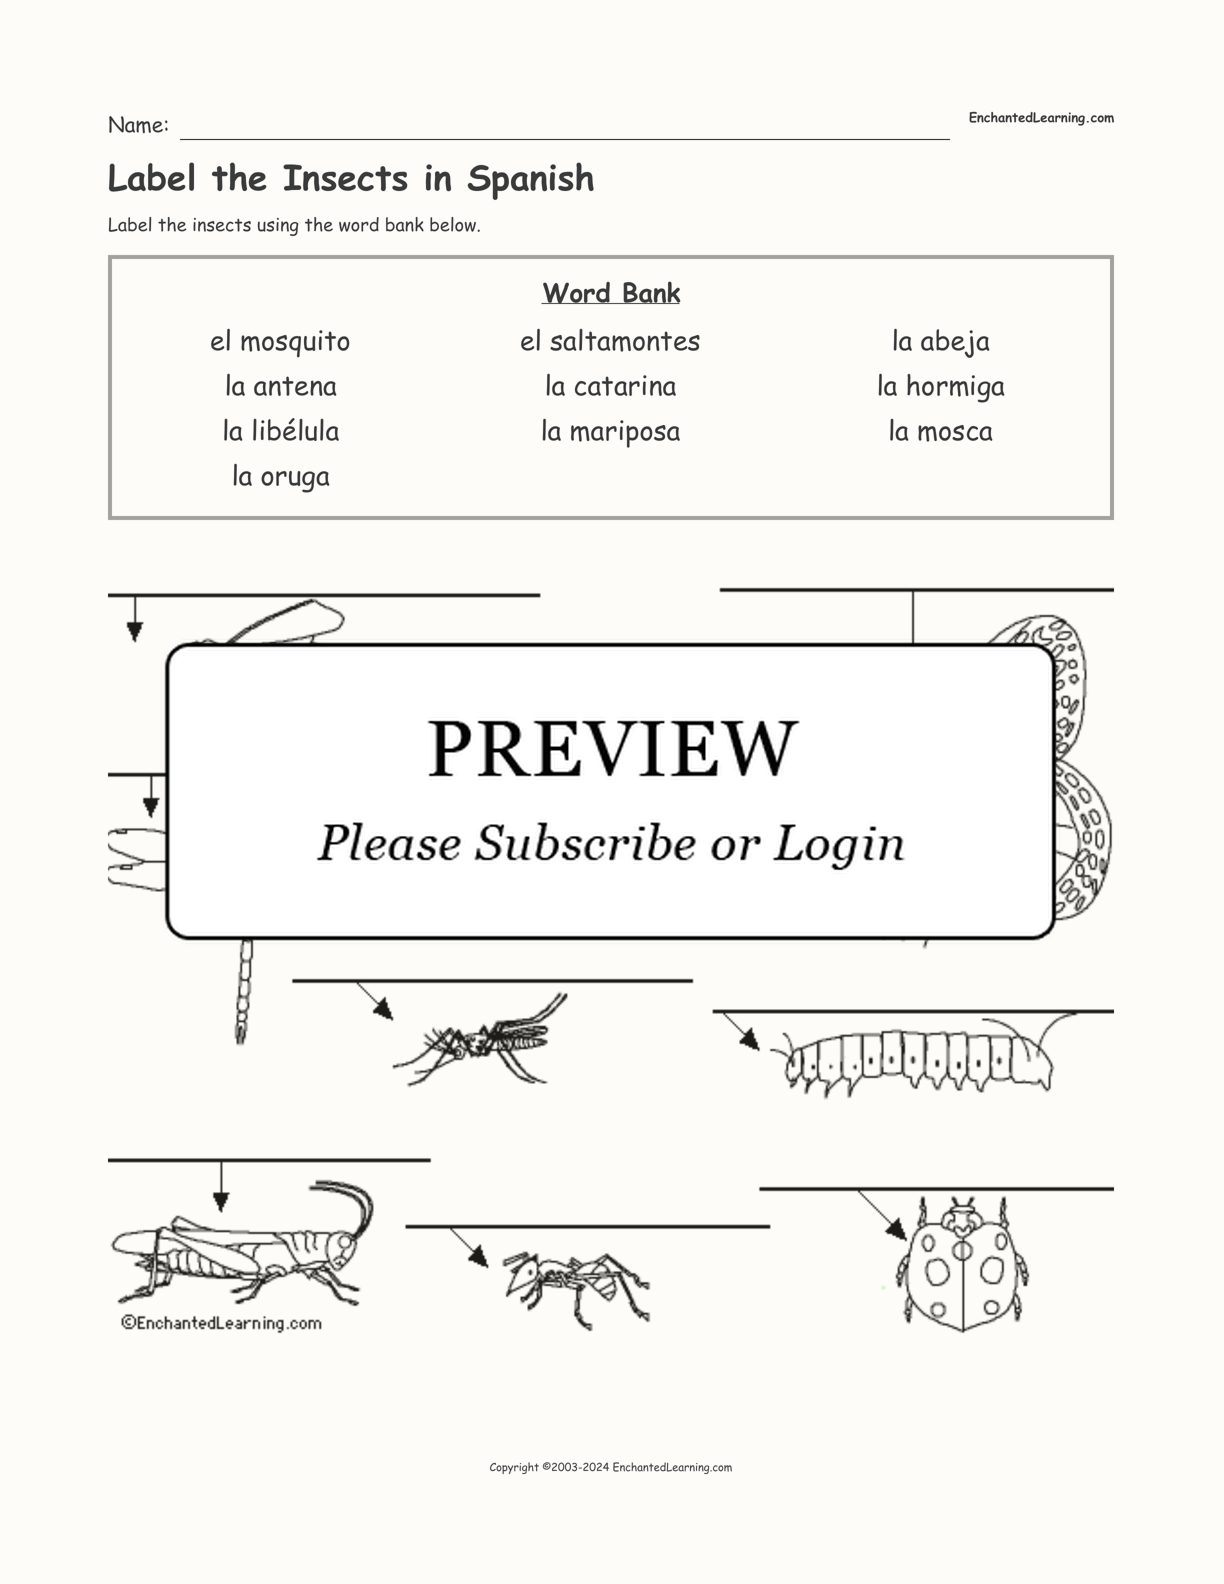 Label the Insects in Spanish interactive worksheet page 1